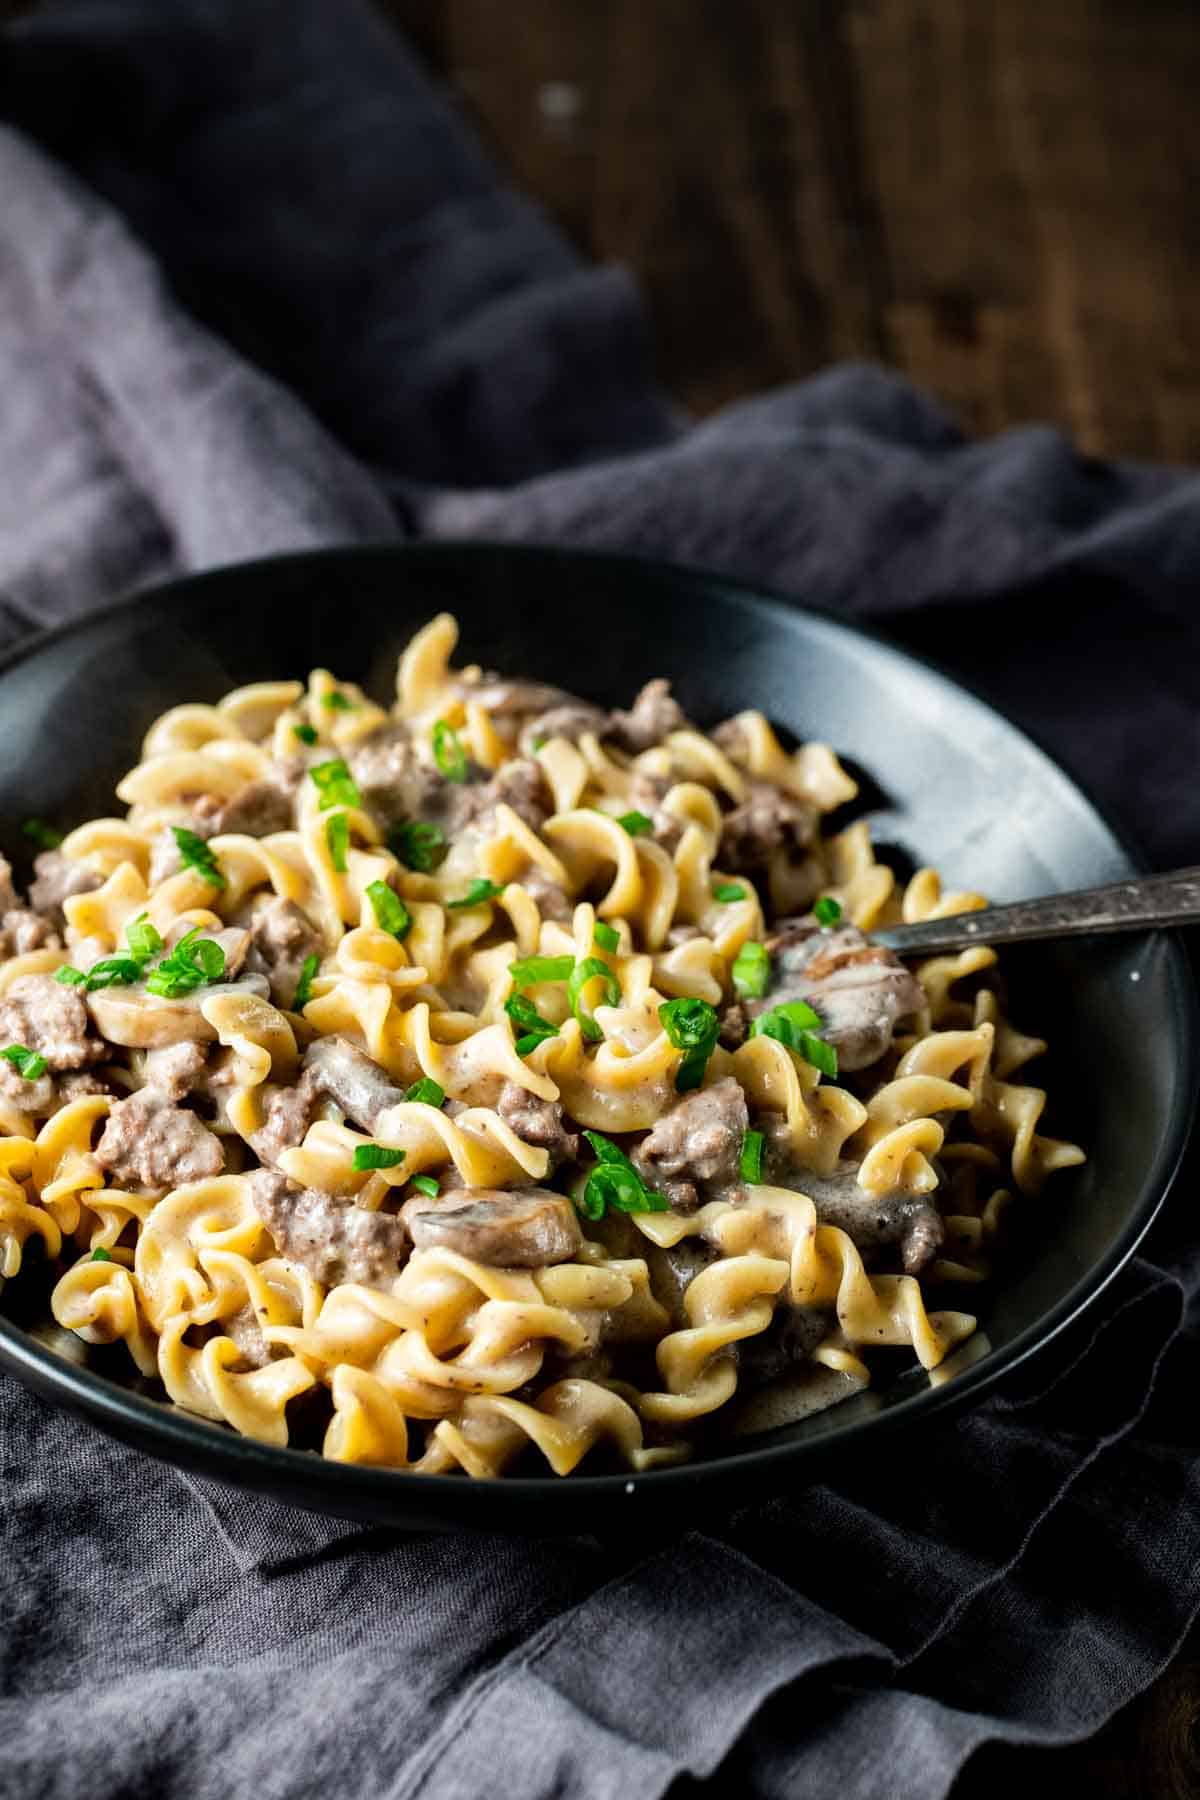 spiral pasta with a creamy mushroom and beef sauce garnished with parsley